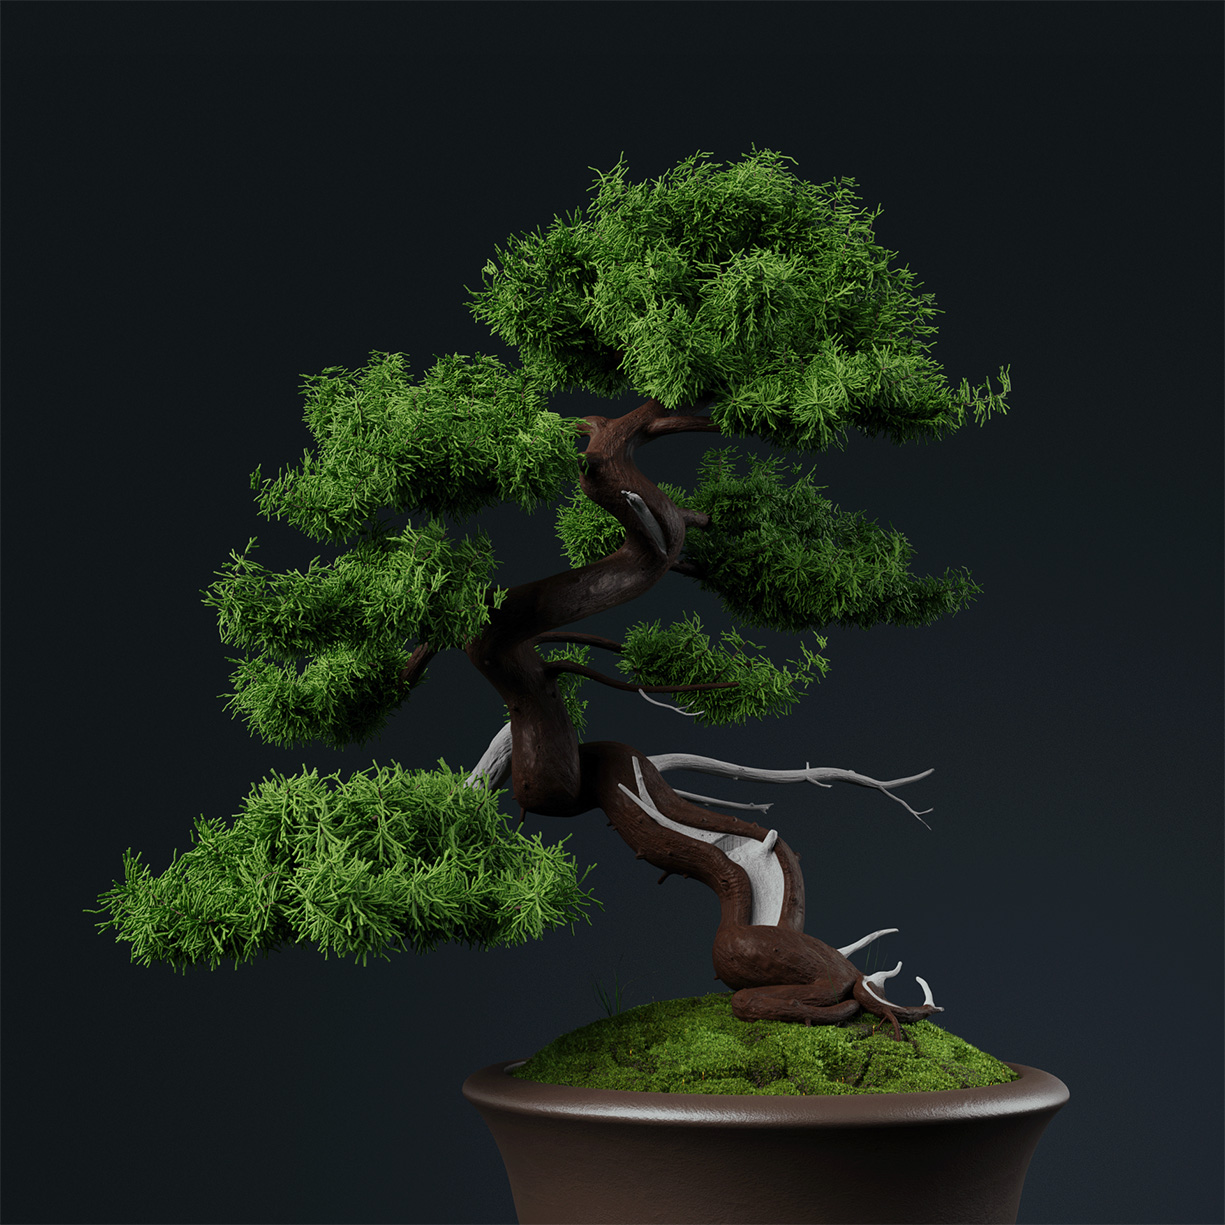 Chinese Juniper Bonsai 3D model - Finished Projects - Blender Artists ...